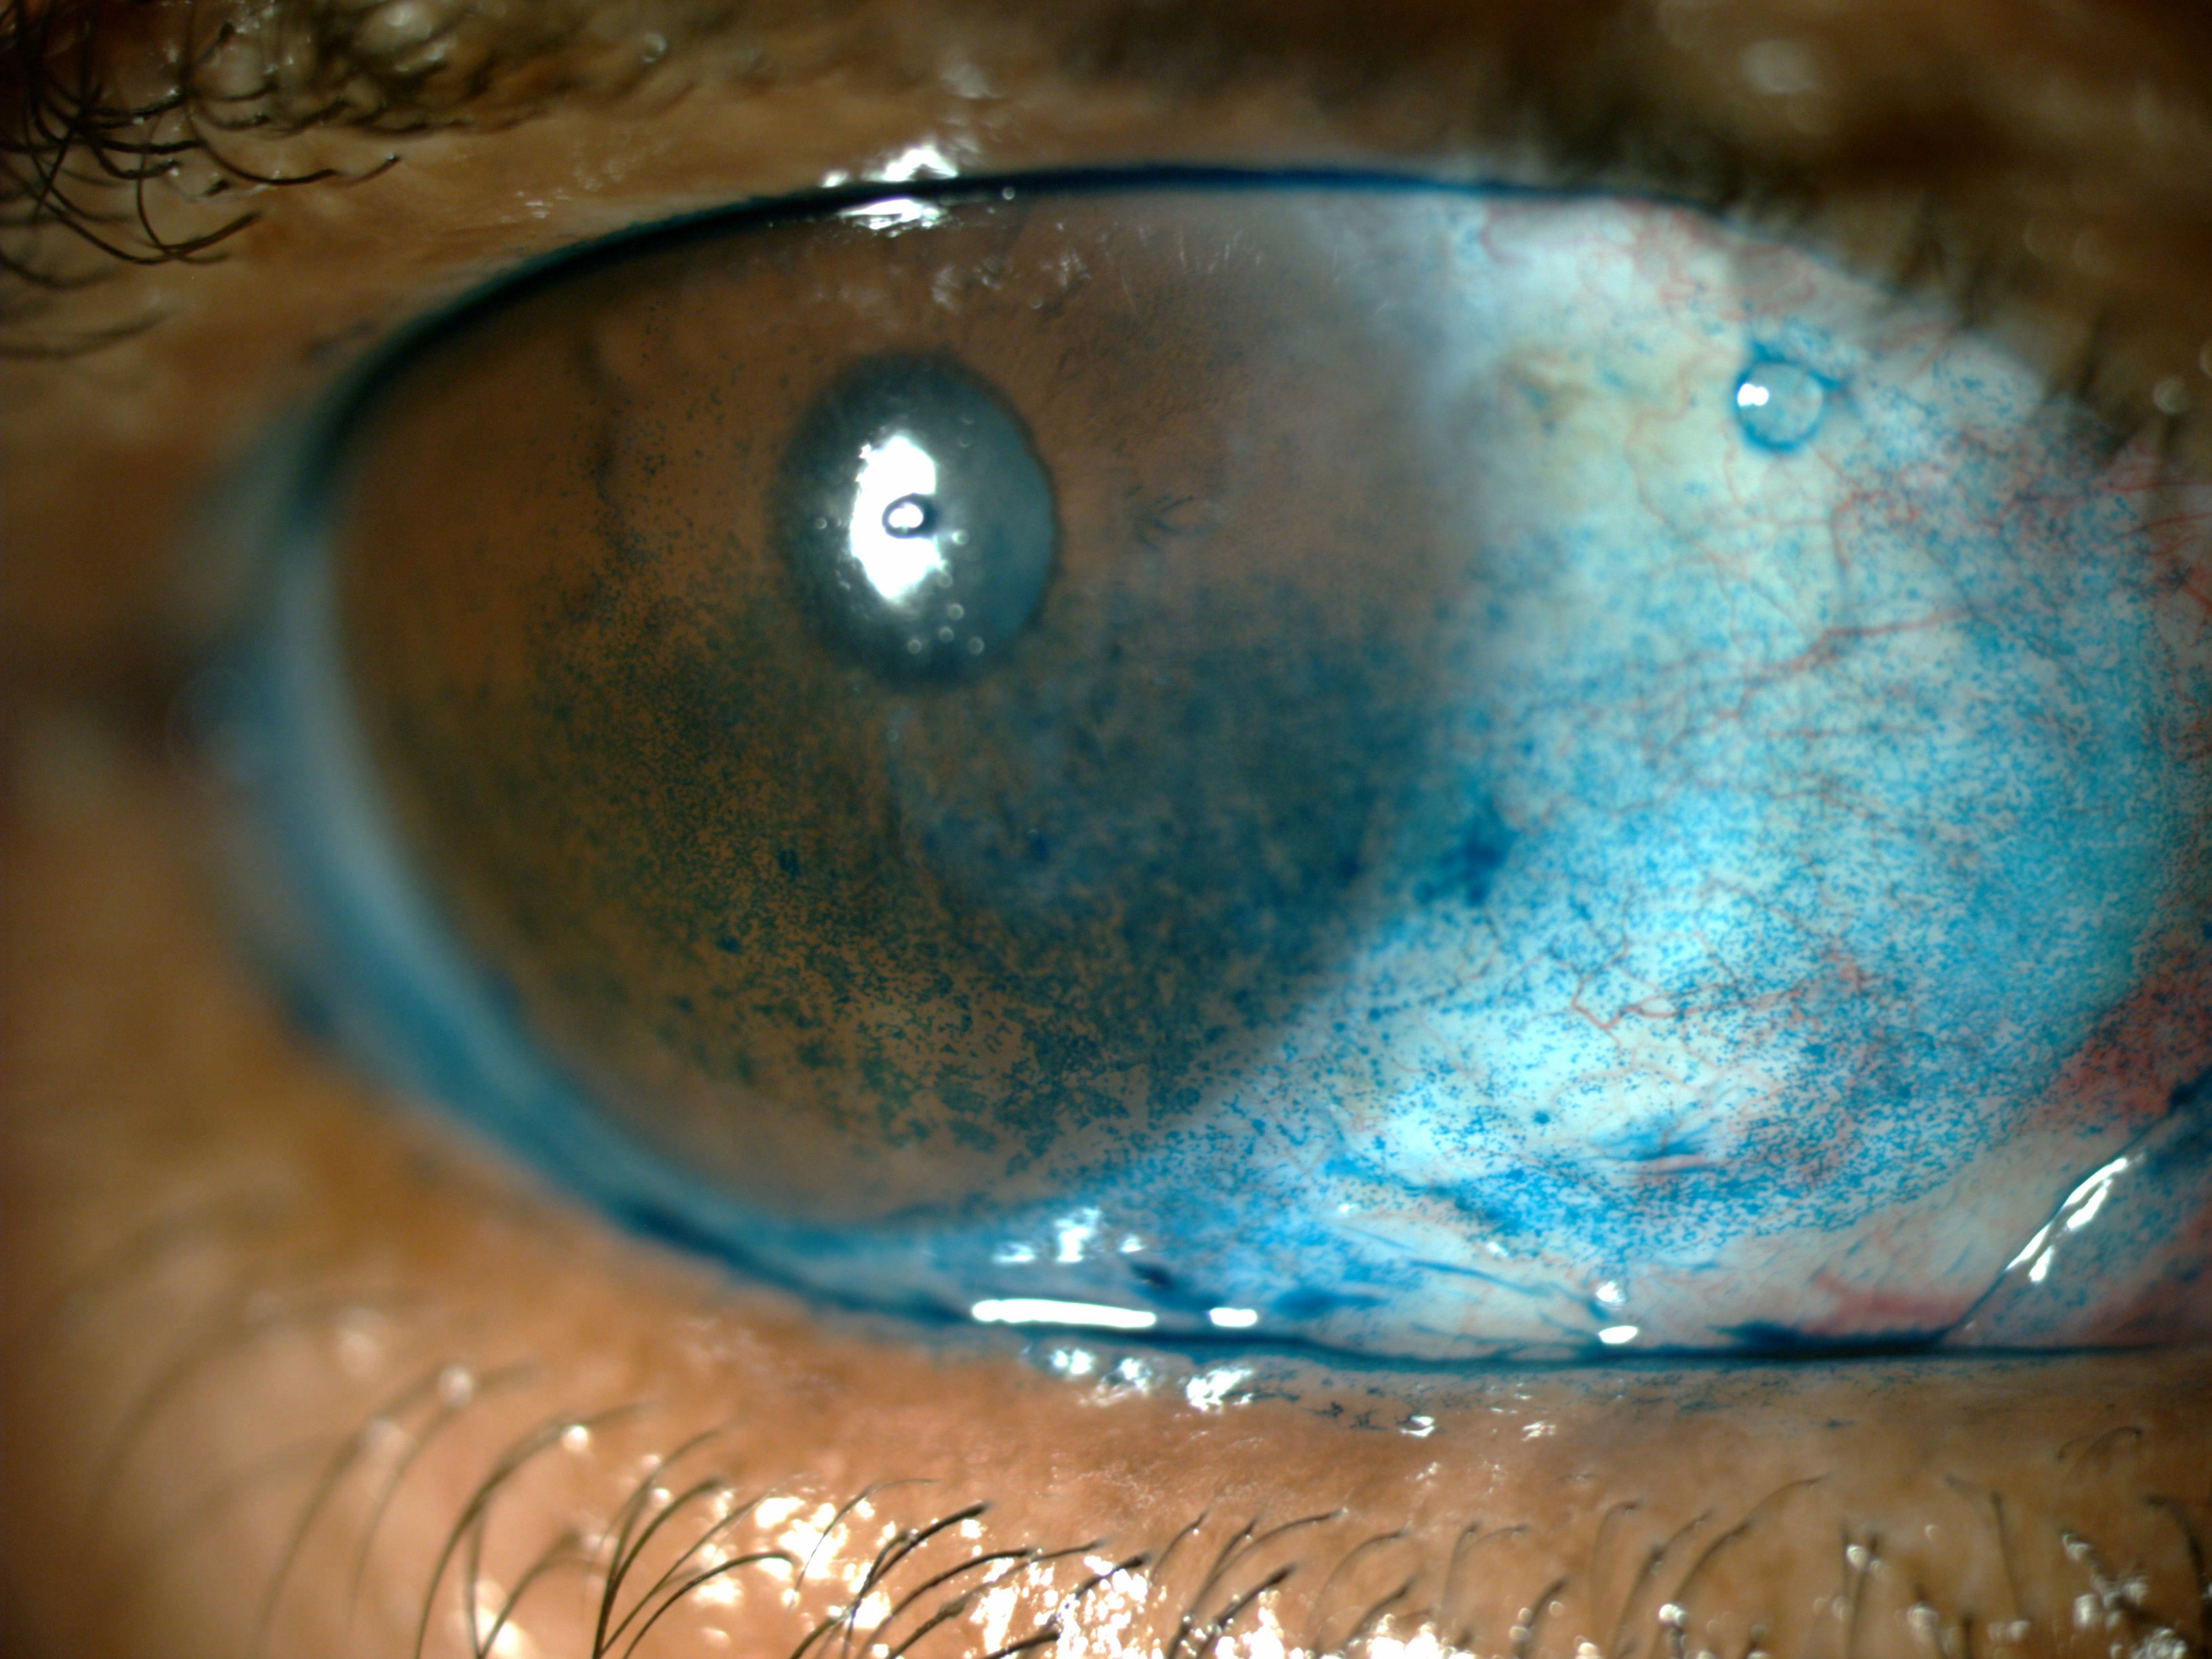 Severe dry eye patients with advanced corneal staining are ideal candidates for autologous serum tears.